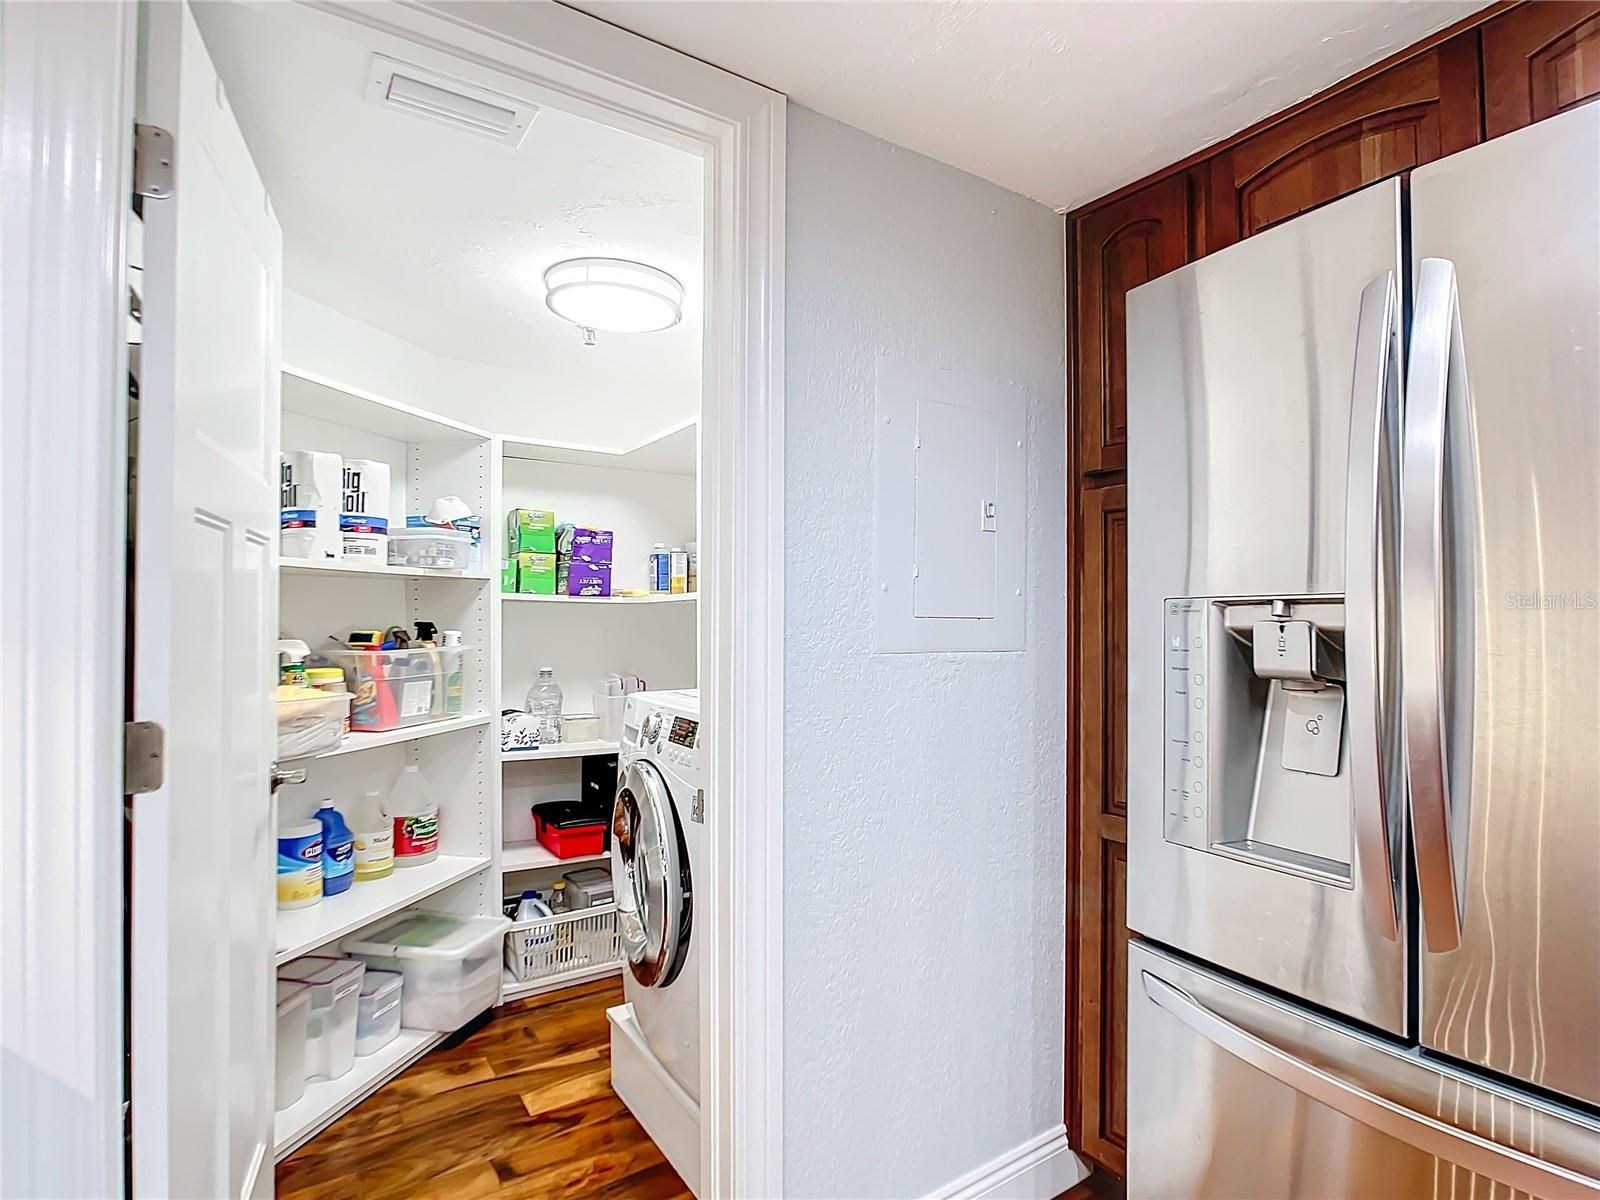 Pantry also has laundry / washer & dryer in one.